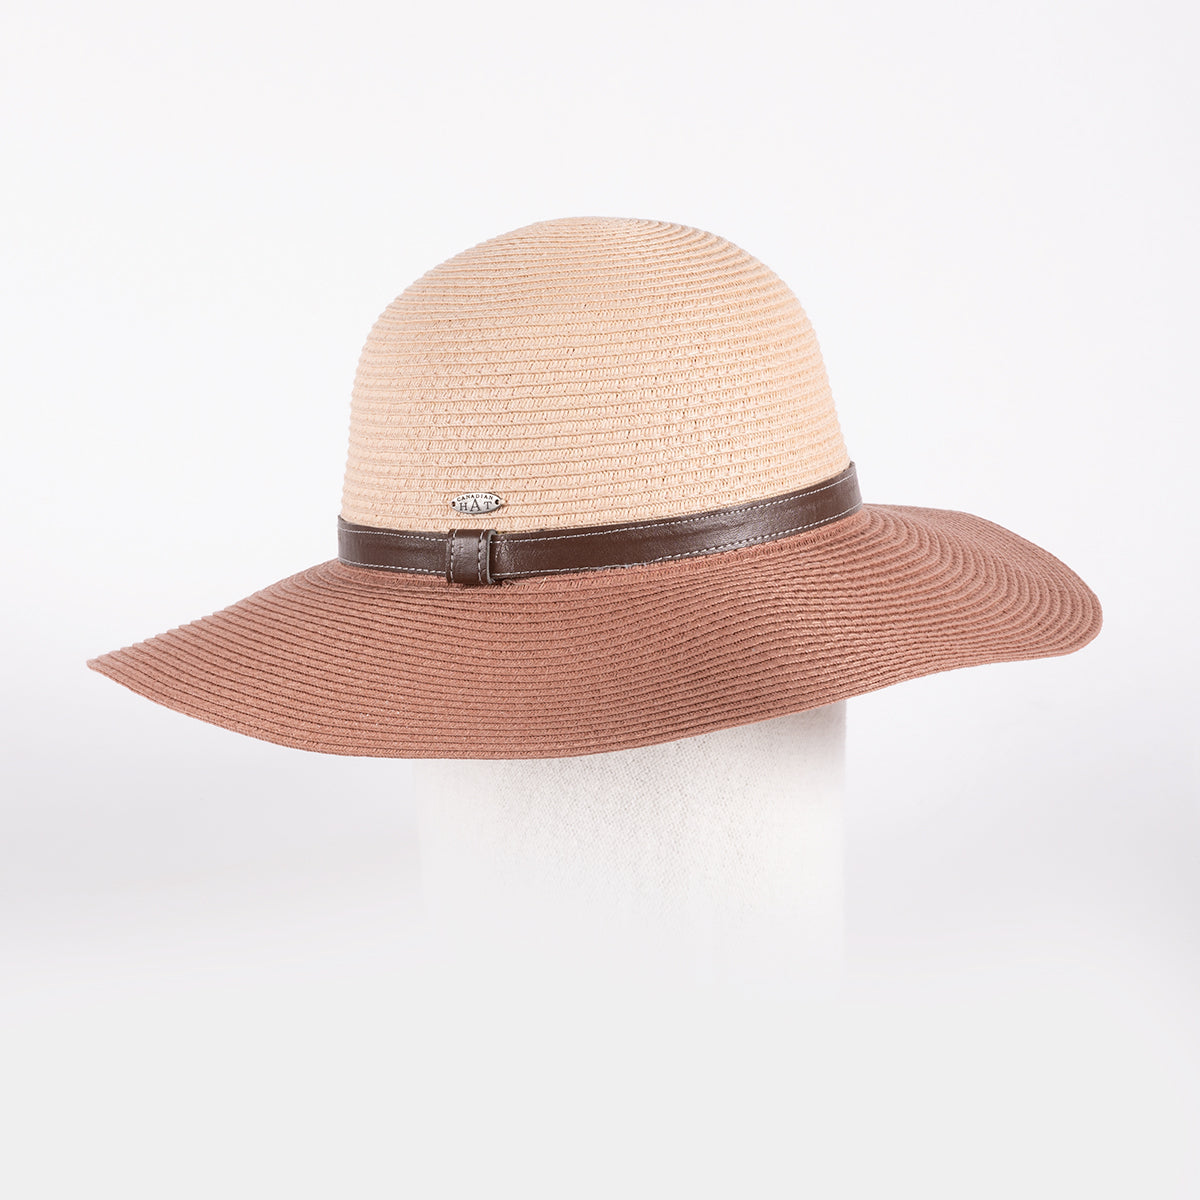 COPACAP - FLOPPY HAT COLOUR - BLOCKED WITH LEATHER BAND